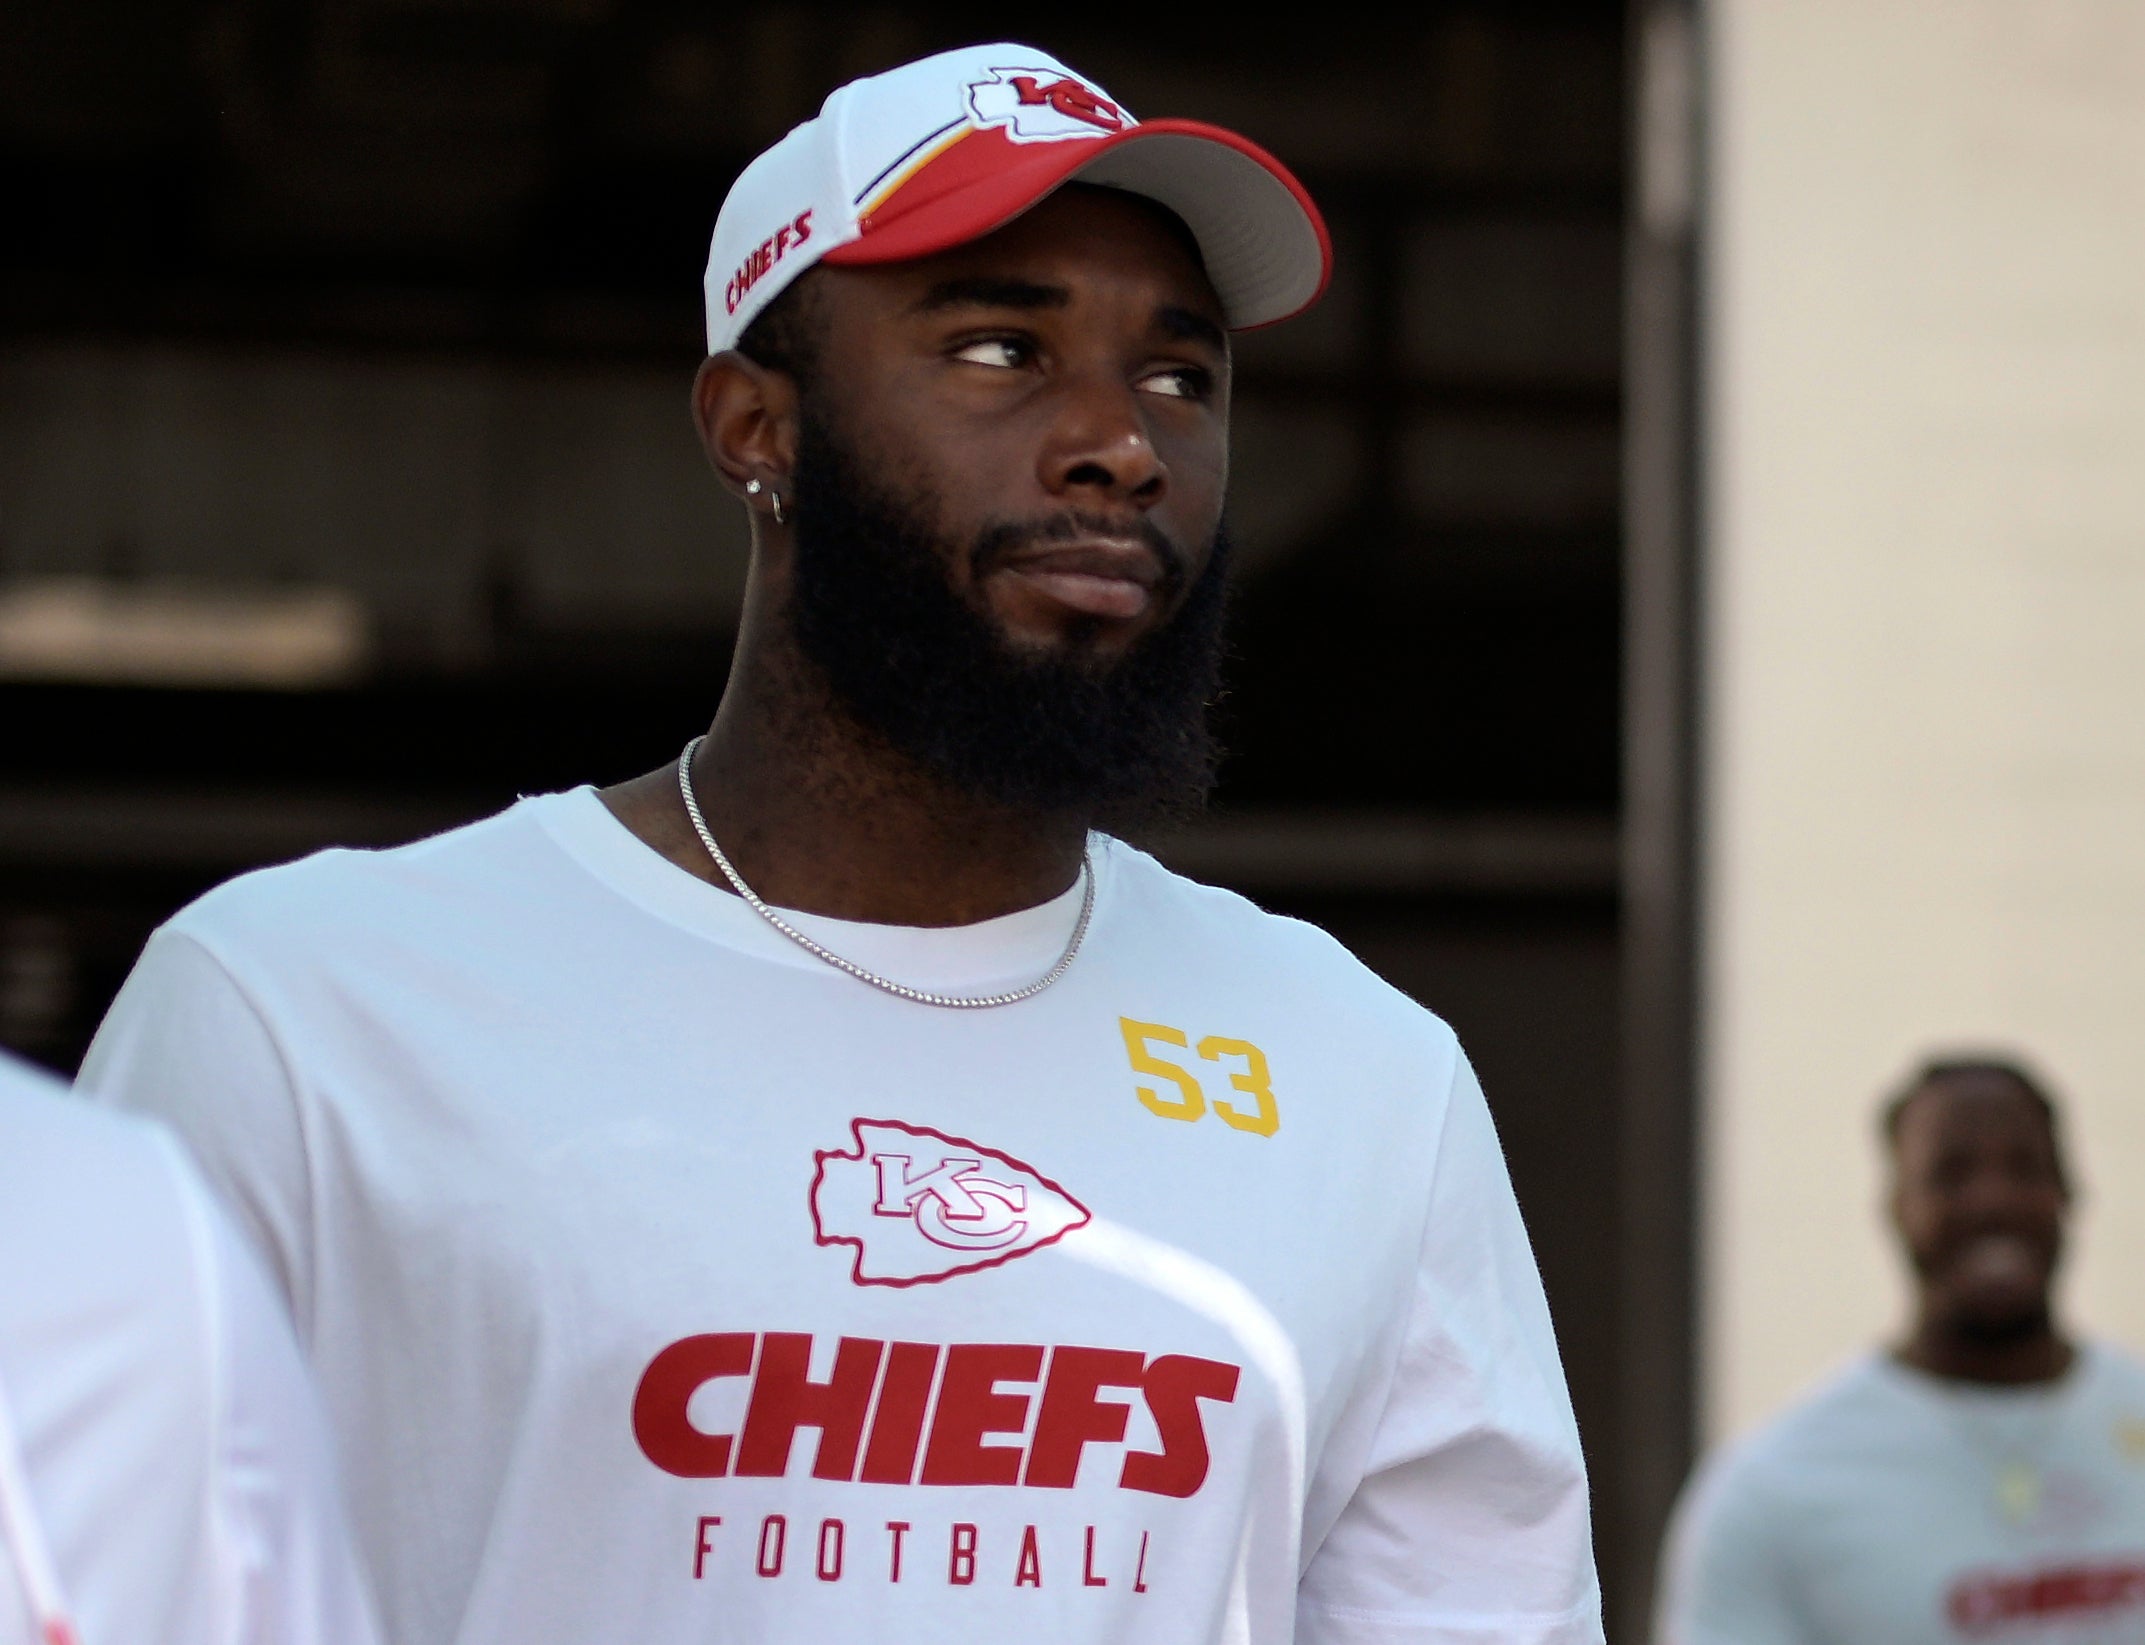 Kansas City Chiefs player BJ Thompson, pictured, suffered a seizure and went into cardiac arrest during a team meeting on Thursday